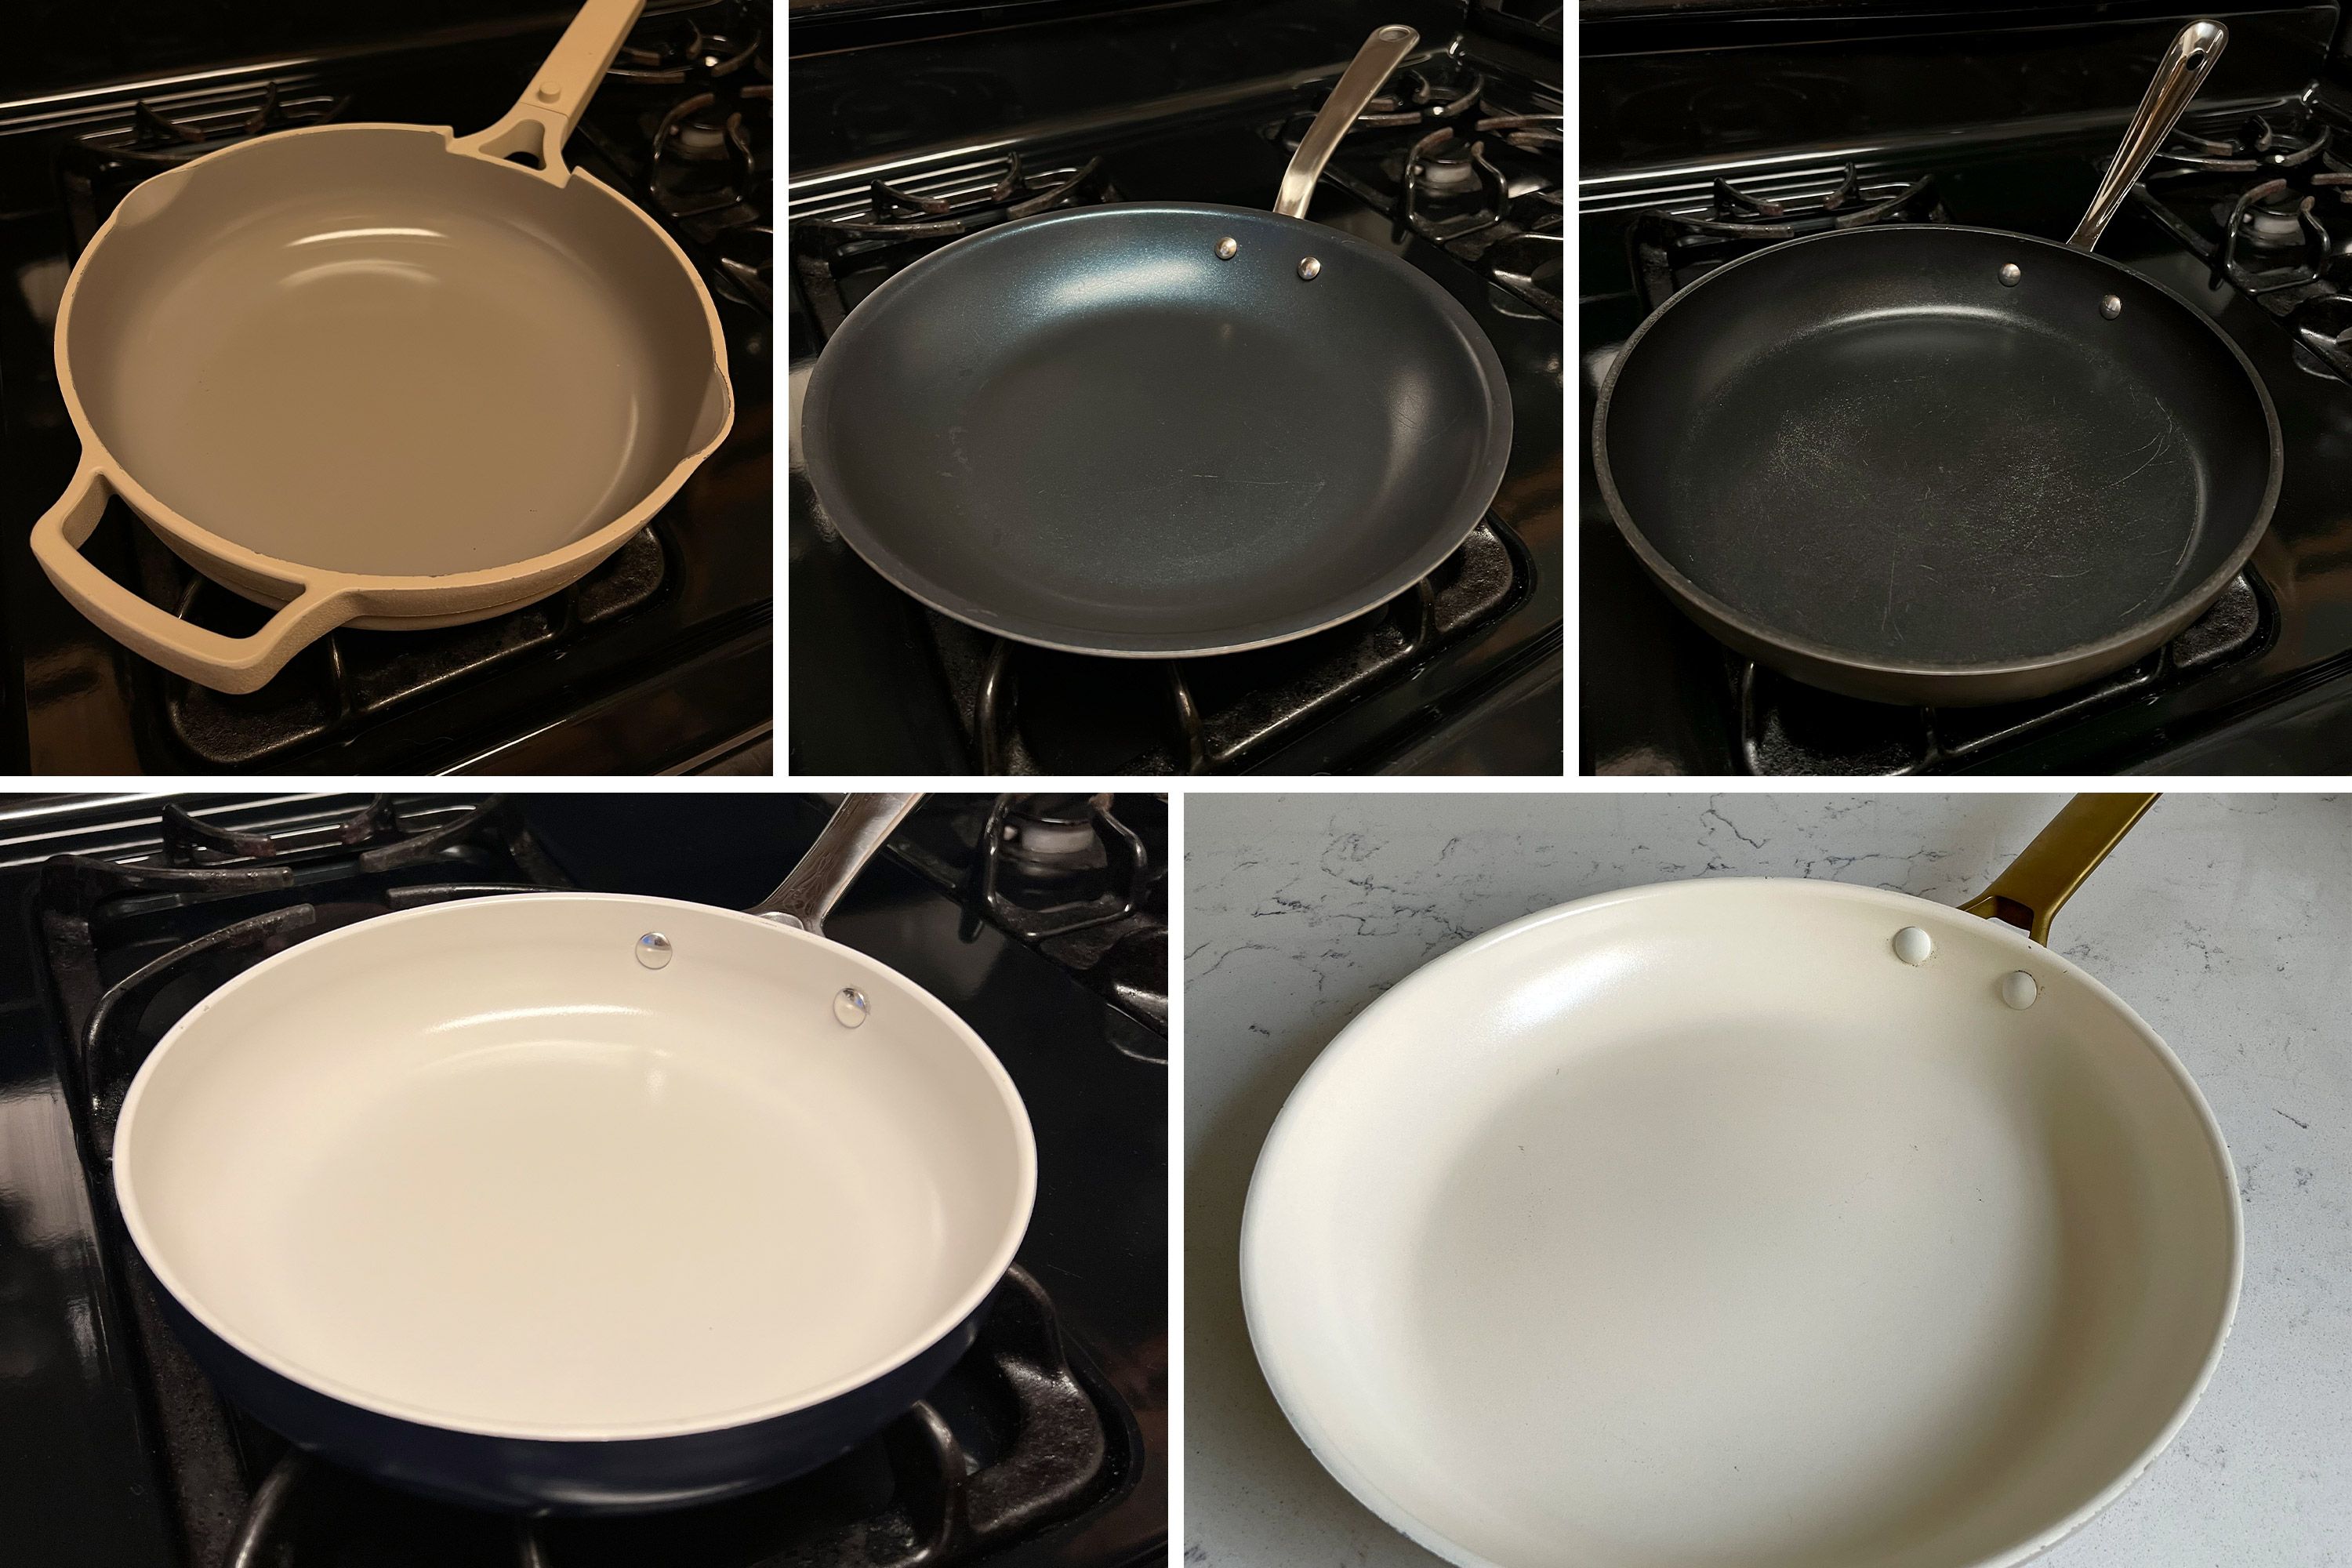 The best non-stick pans for easy, efficient cooking